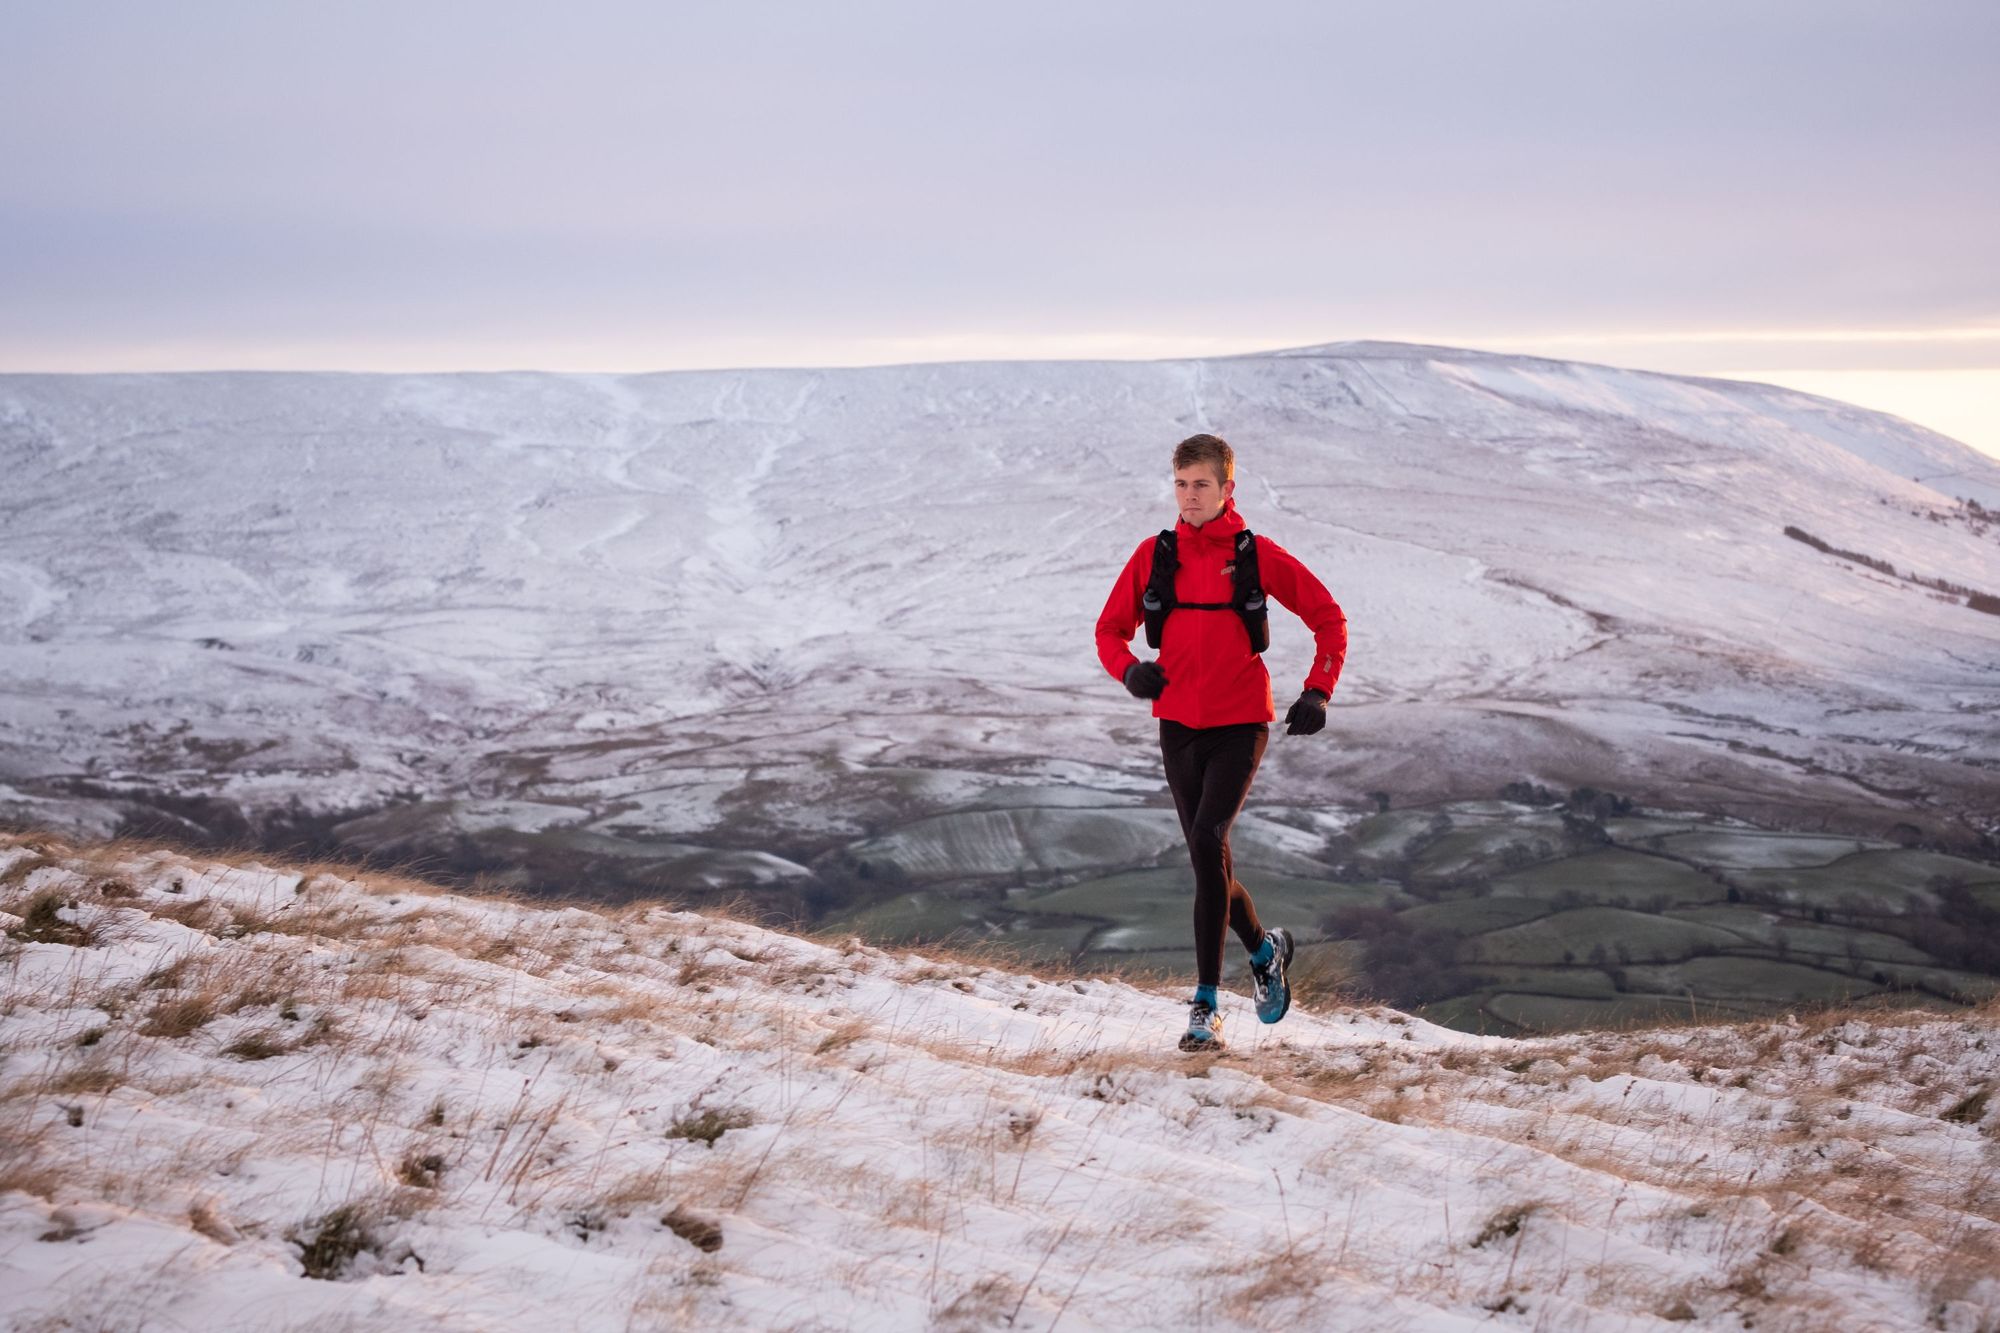 Adventurer Alex Stanisforth, who is also the co-founder of mental health charity Mind Over Mountains, running in the snow. Photo: Daniel Toal